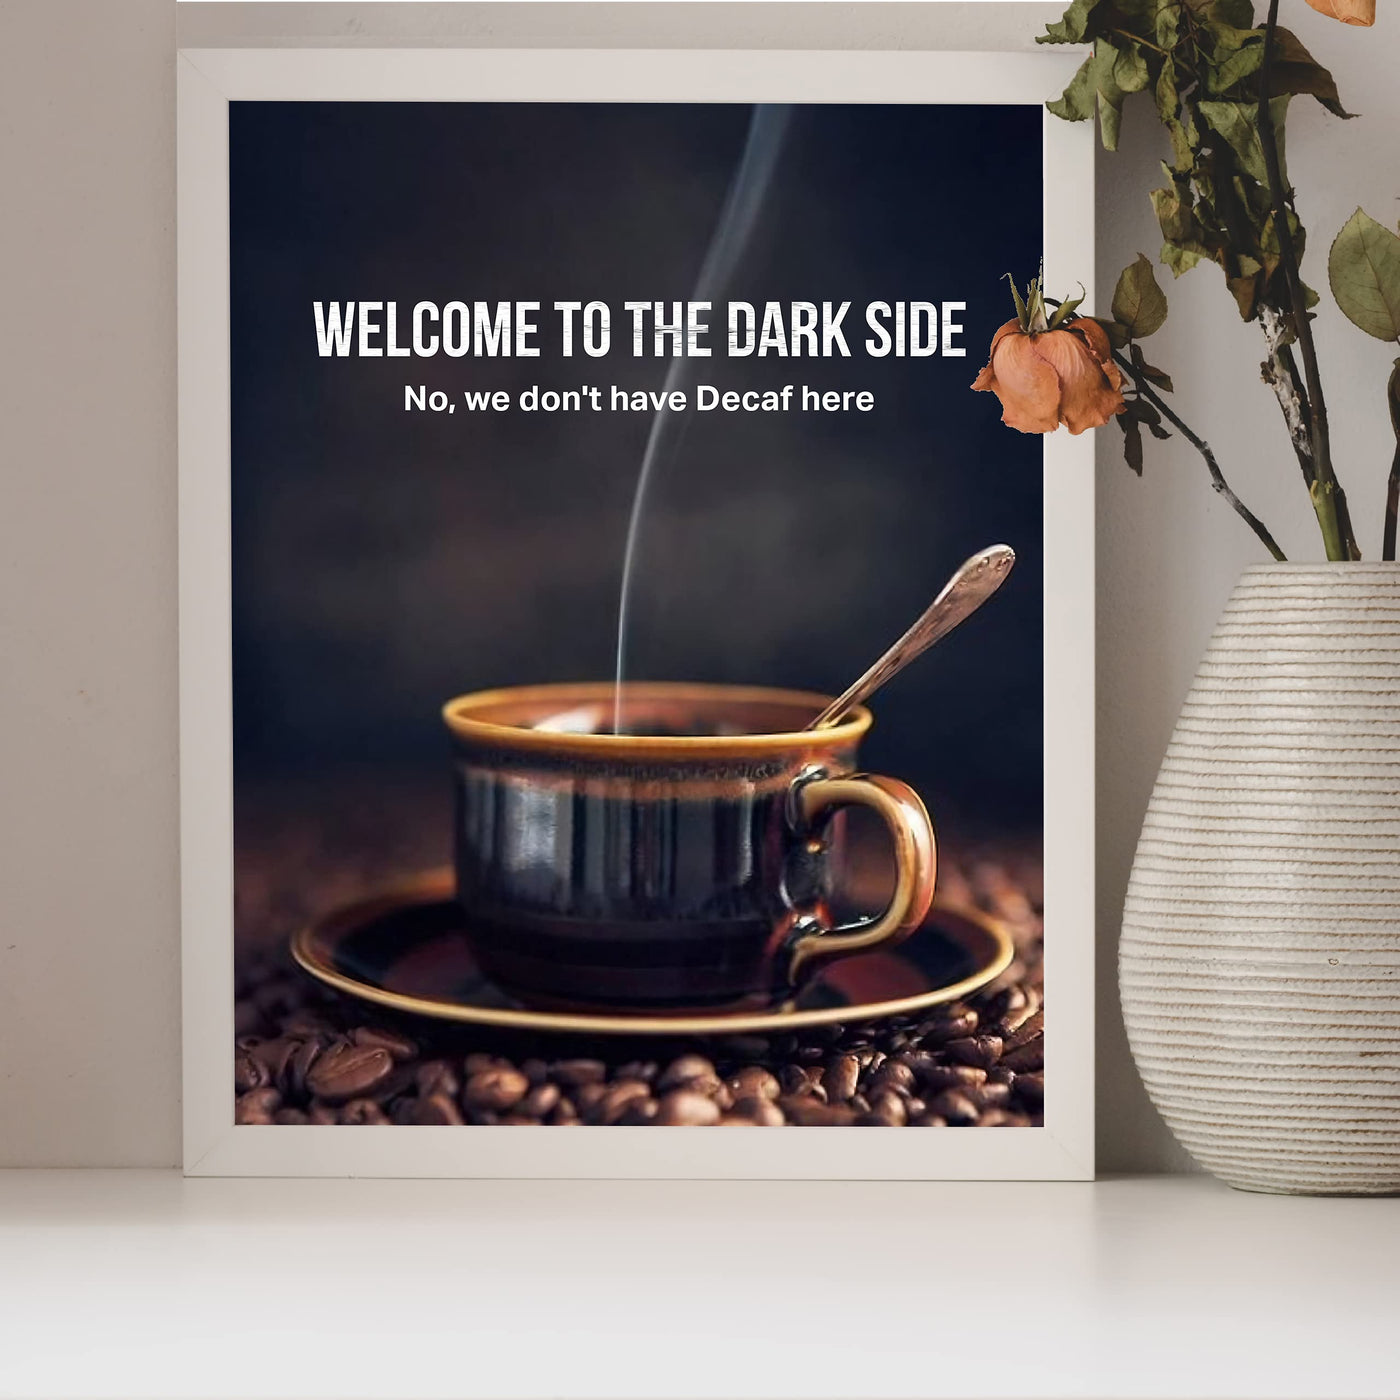 Welcome to the Dark Side -Funny Coffee Mug Wall Sign -8 x 10" Humorous Kitchen & Cafe Art Print-Ready to Frame. Home & Office Decor. Perfect Restaurant-Java Bar Decor. Fun Gift for Coffee Addicts!